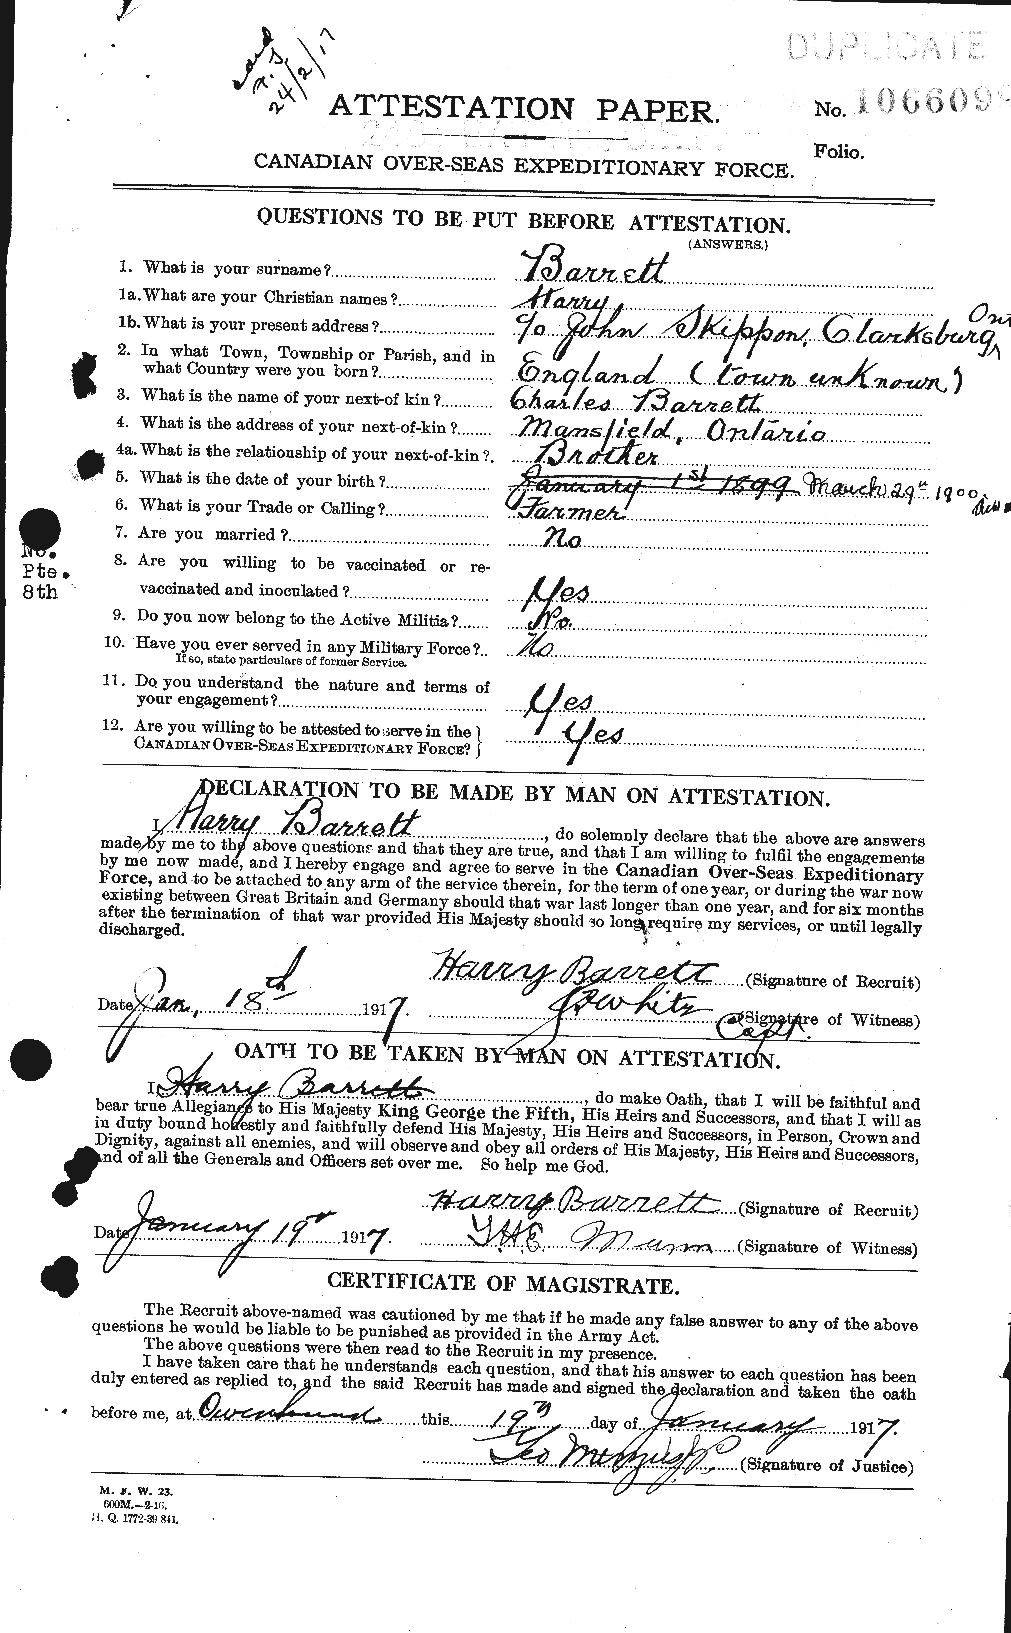 Personnel Records of the First World War - CEF 220296a